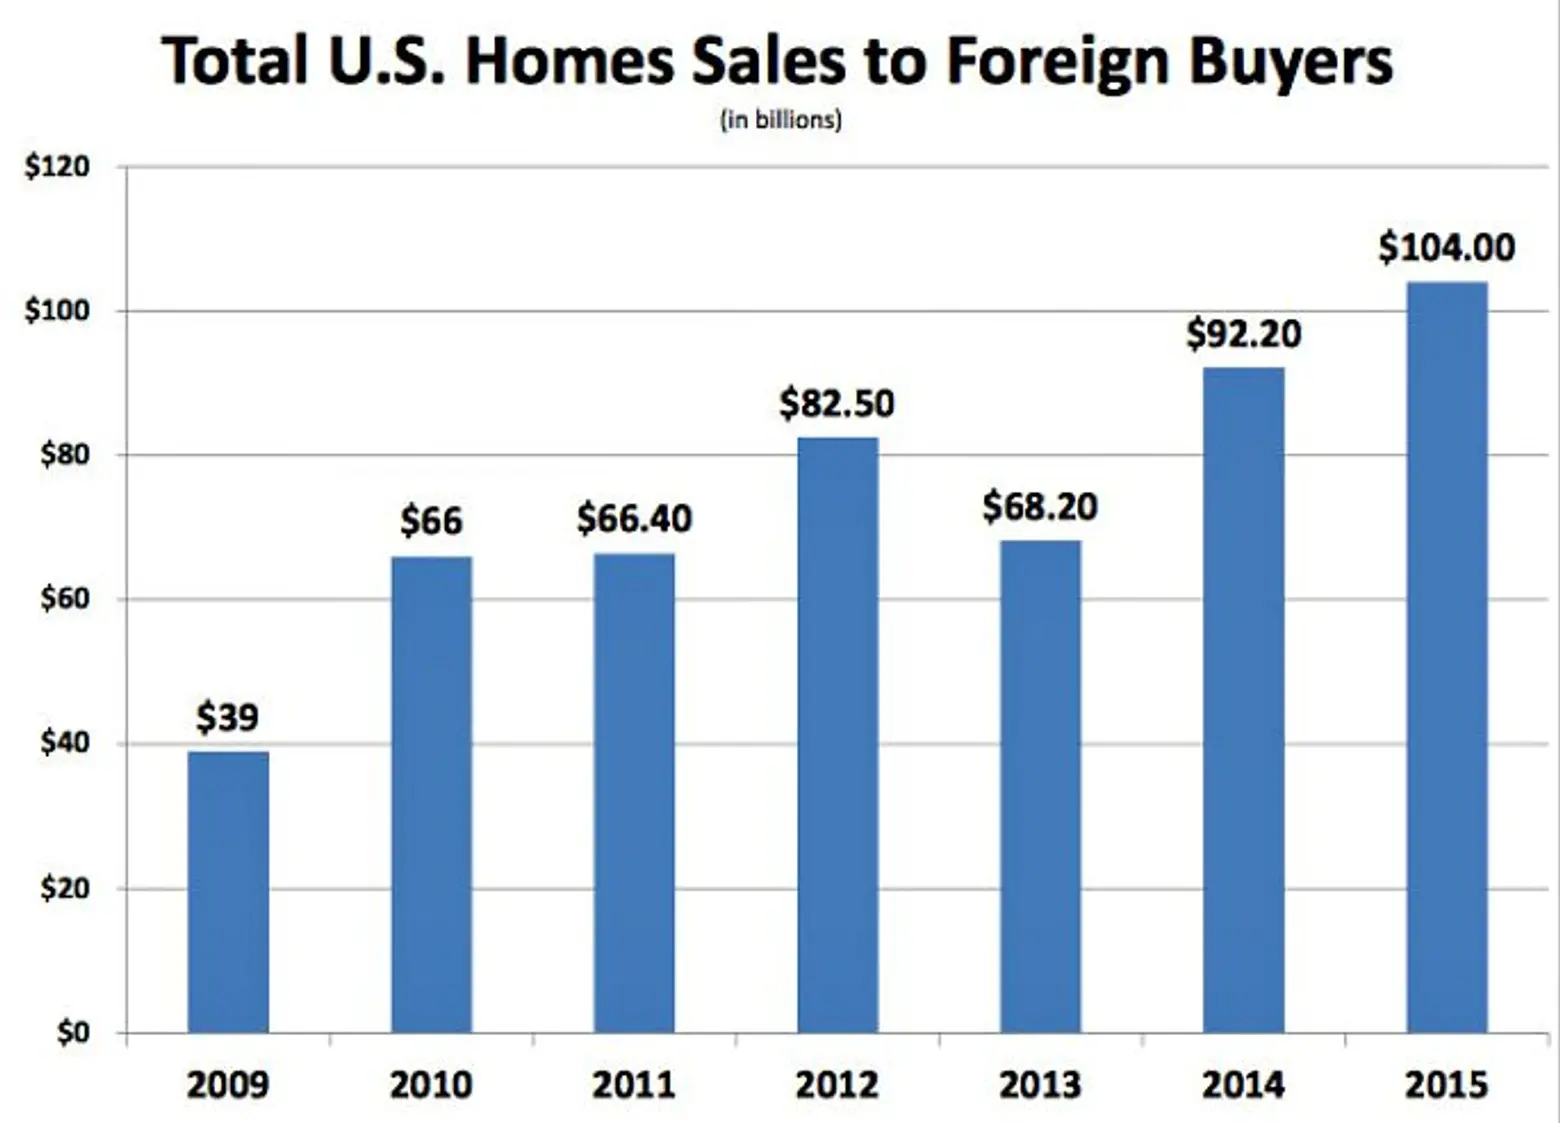 U.S. foreign buyers